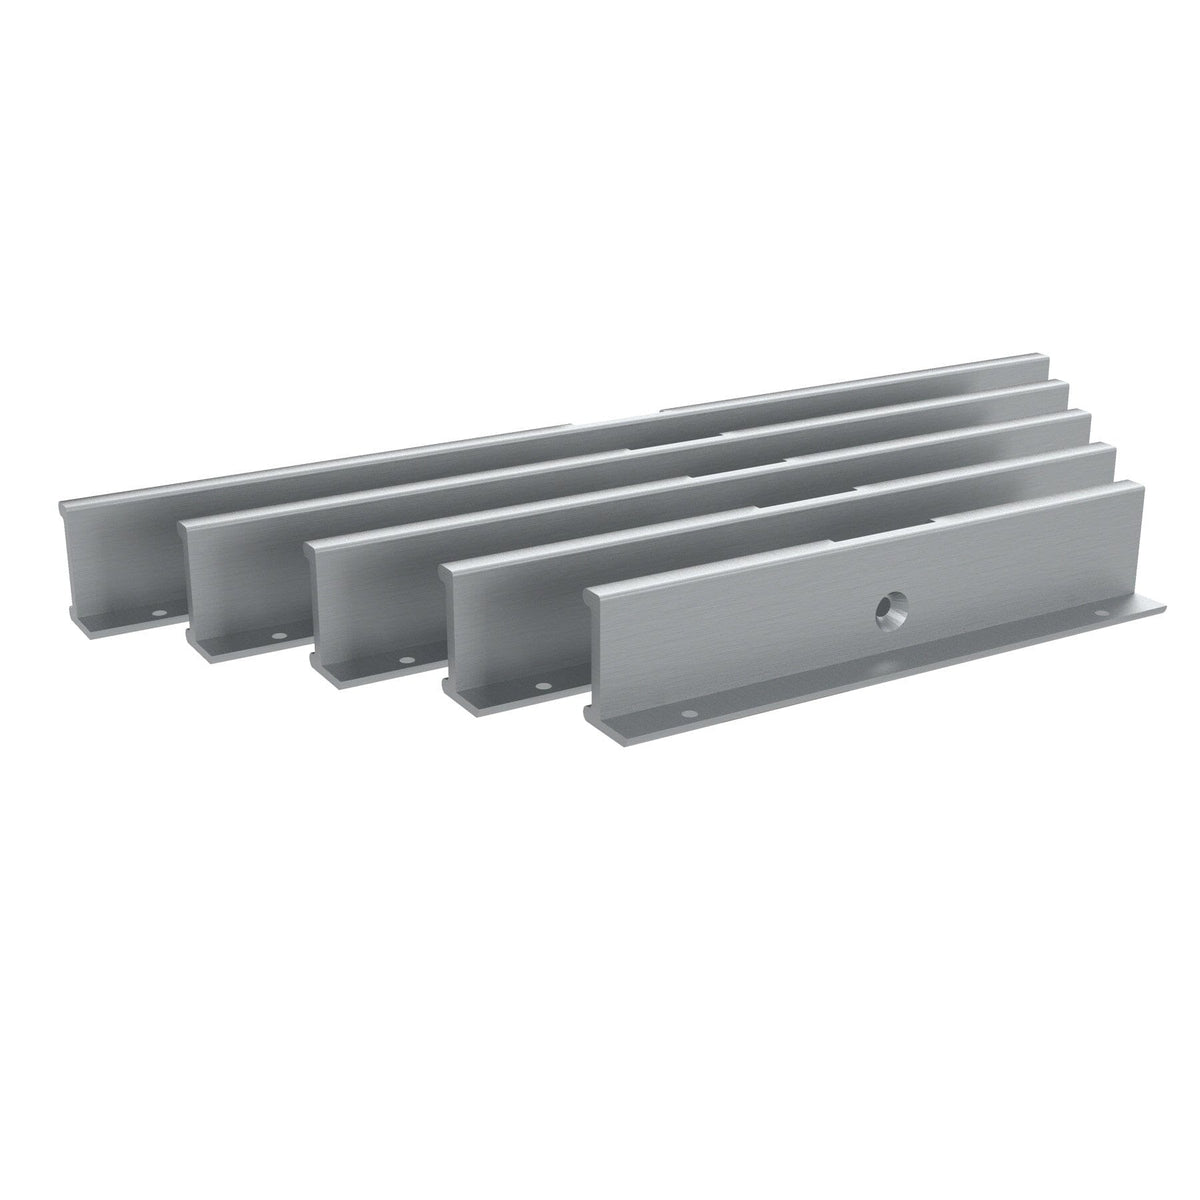 Shelf End Support - Used with Poles – Modern Shelving